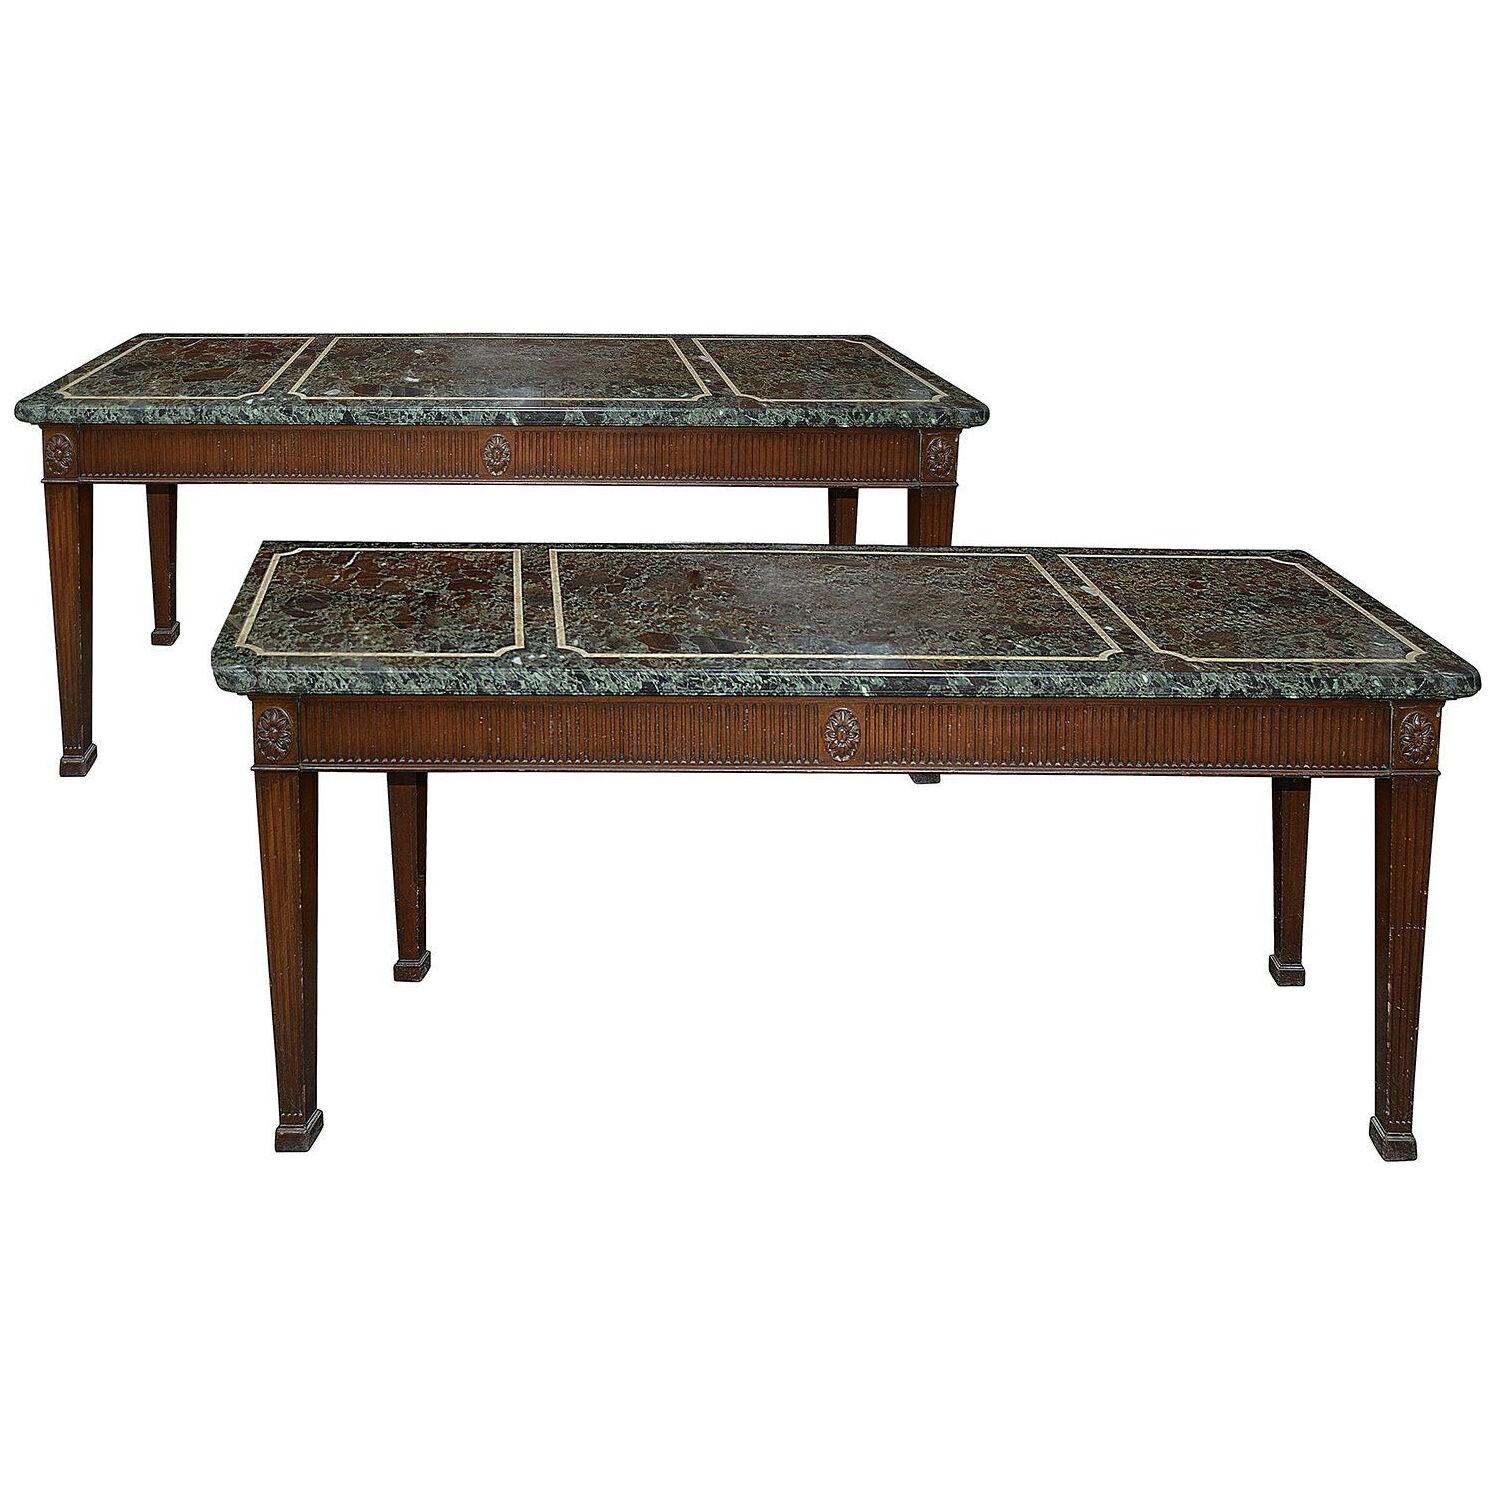 Pair classical Adam Style marble topped console tables, circa 1900